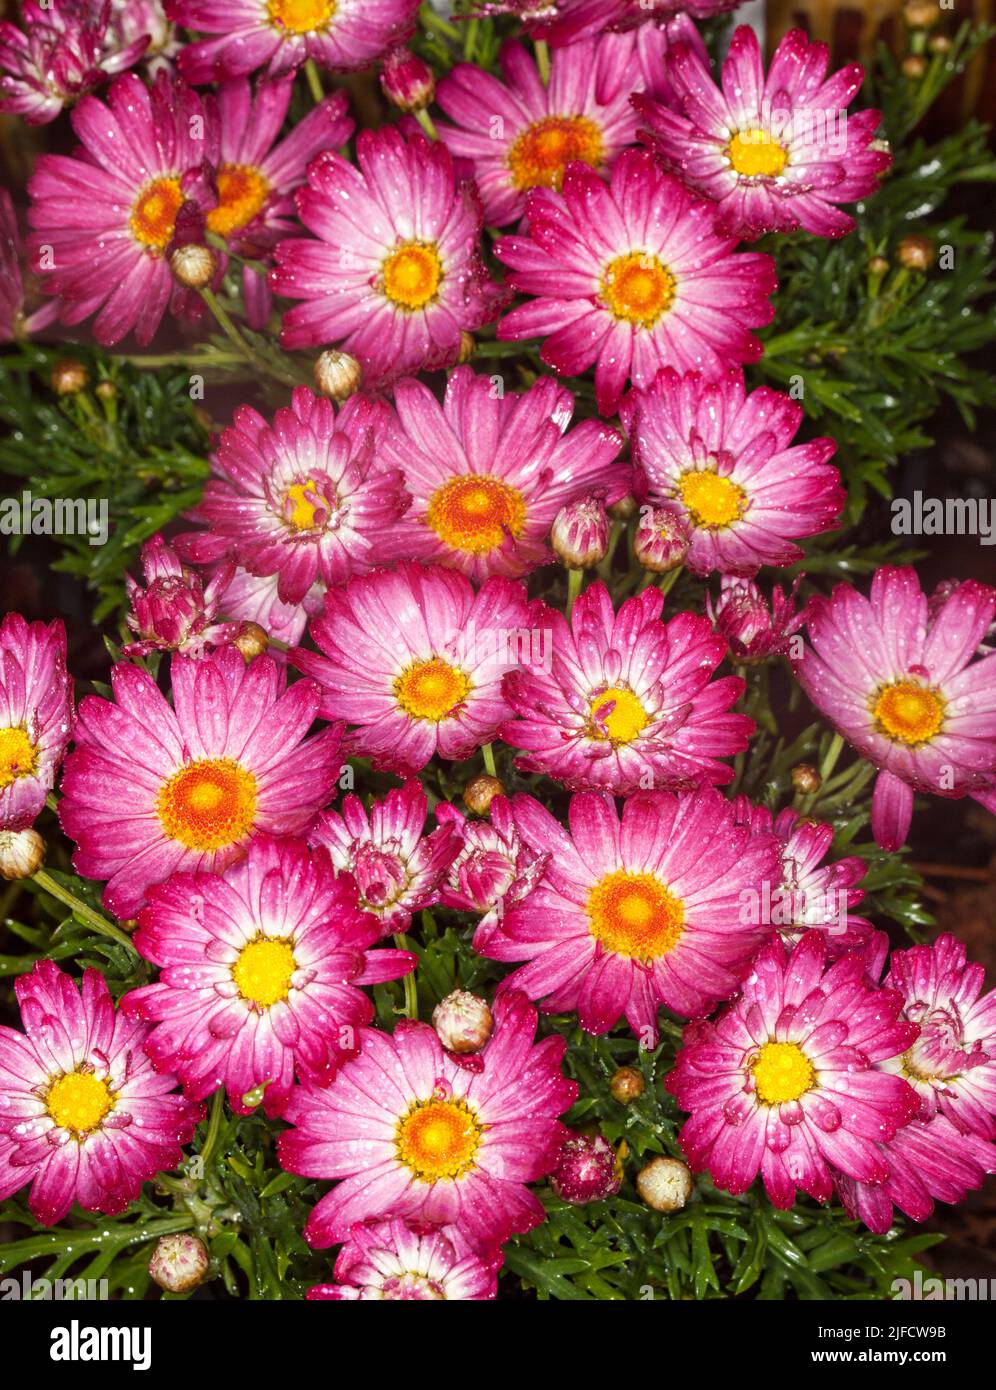 Mass of stunning vivid pink and white flowers of Argyranthemum frutescens, Marguerite Daisy, a perennial garden plant with raindrops on petals Stock Photo